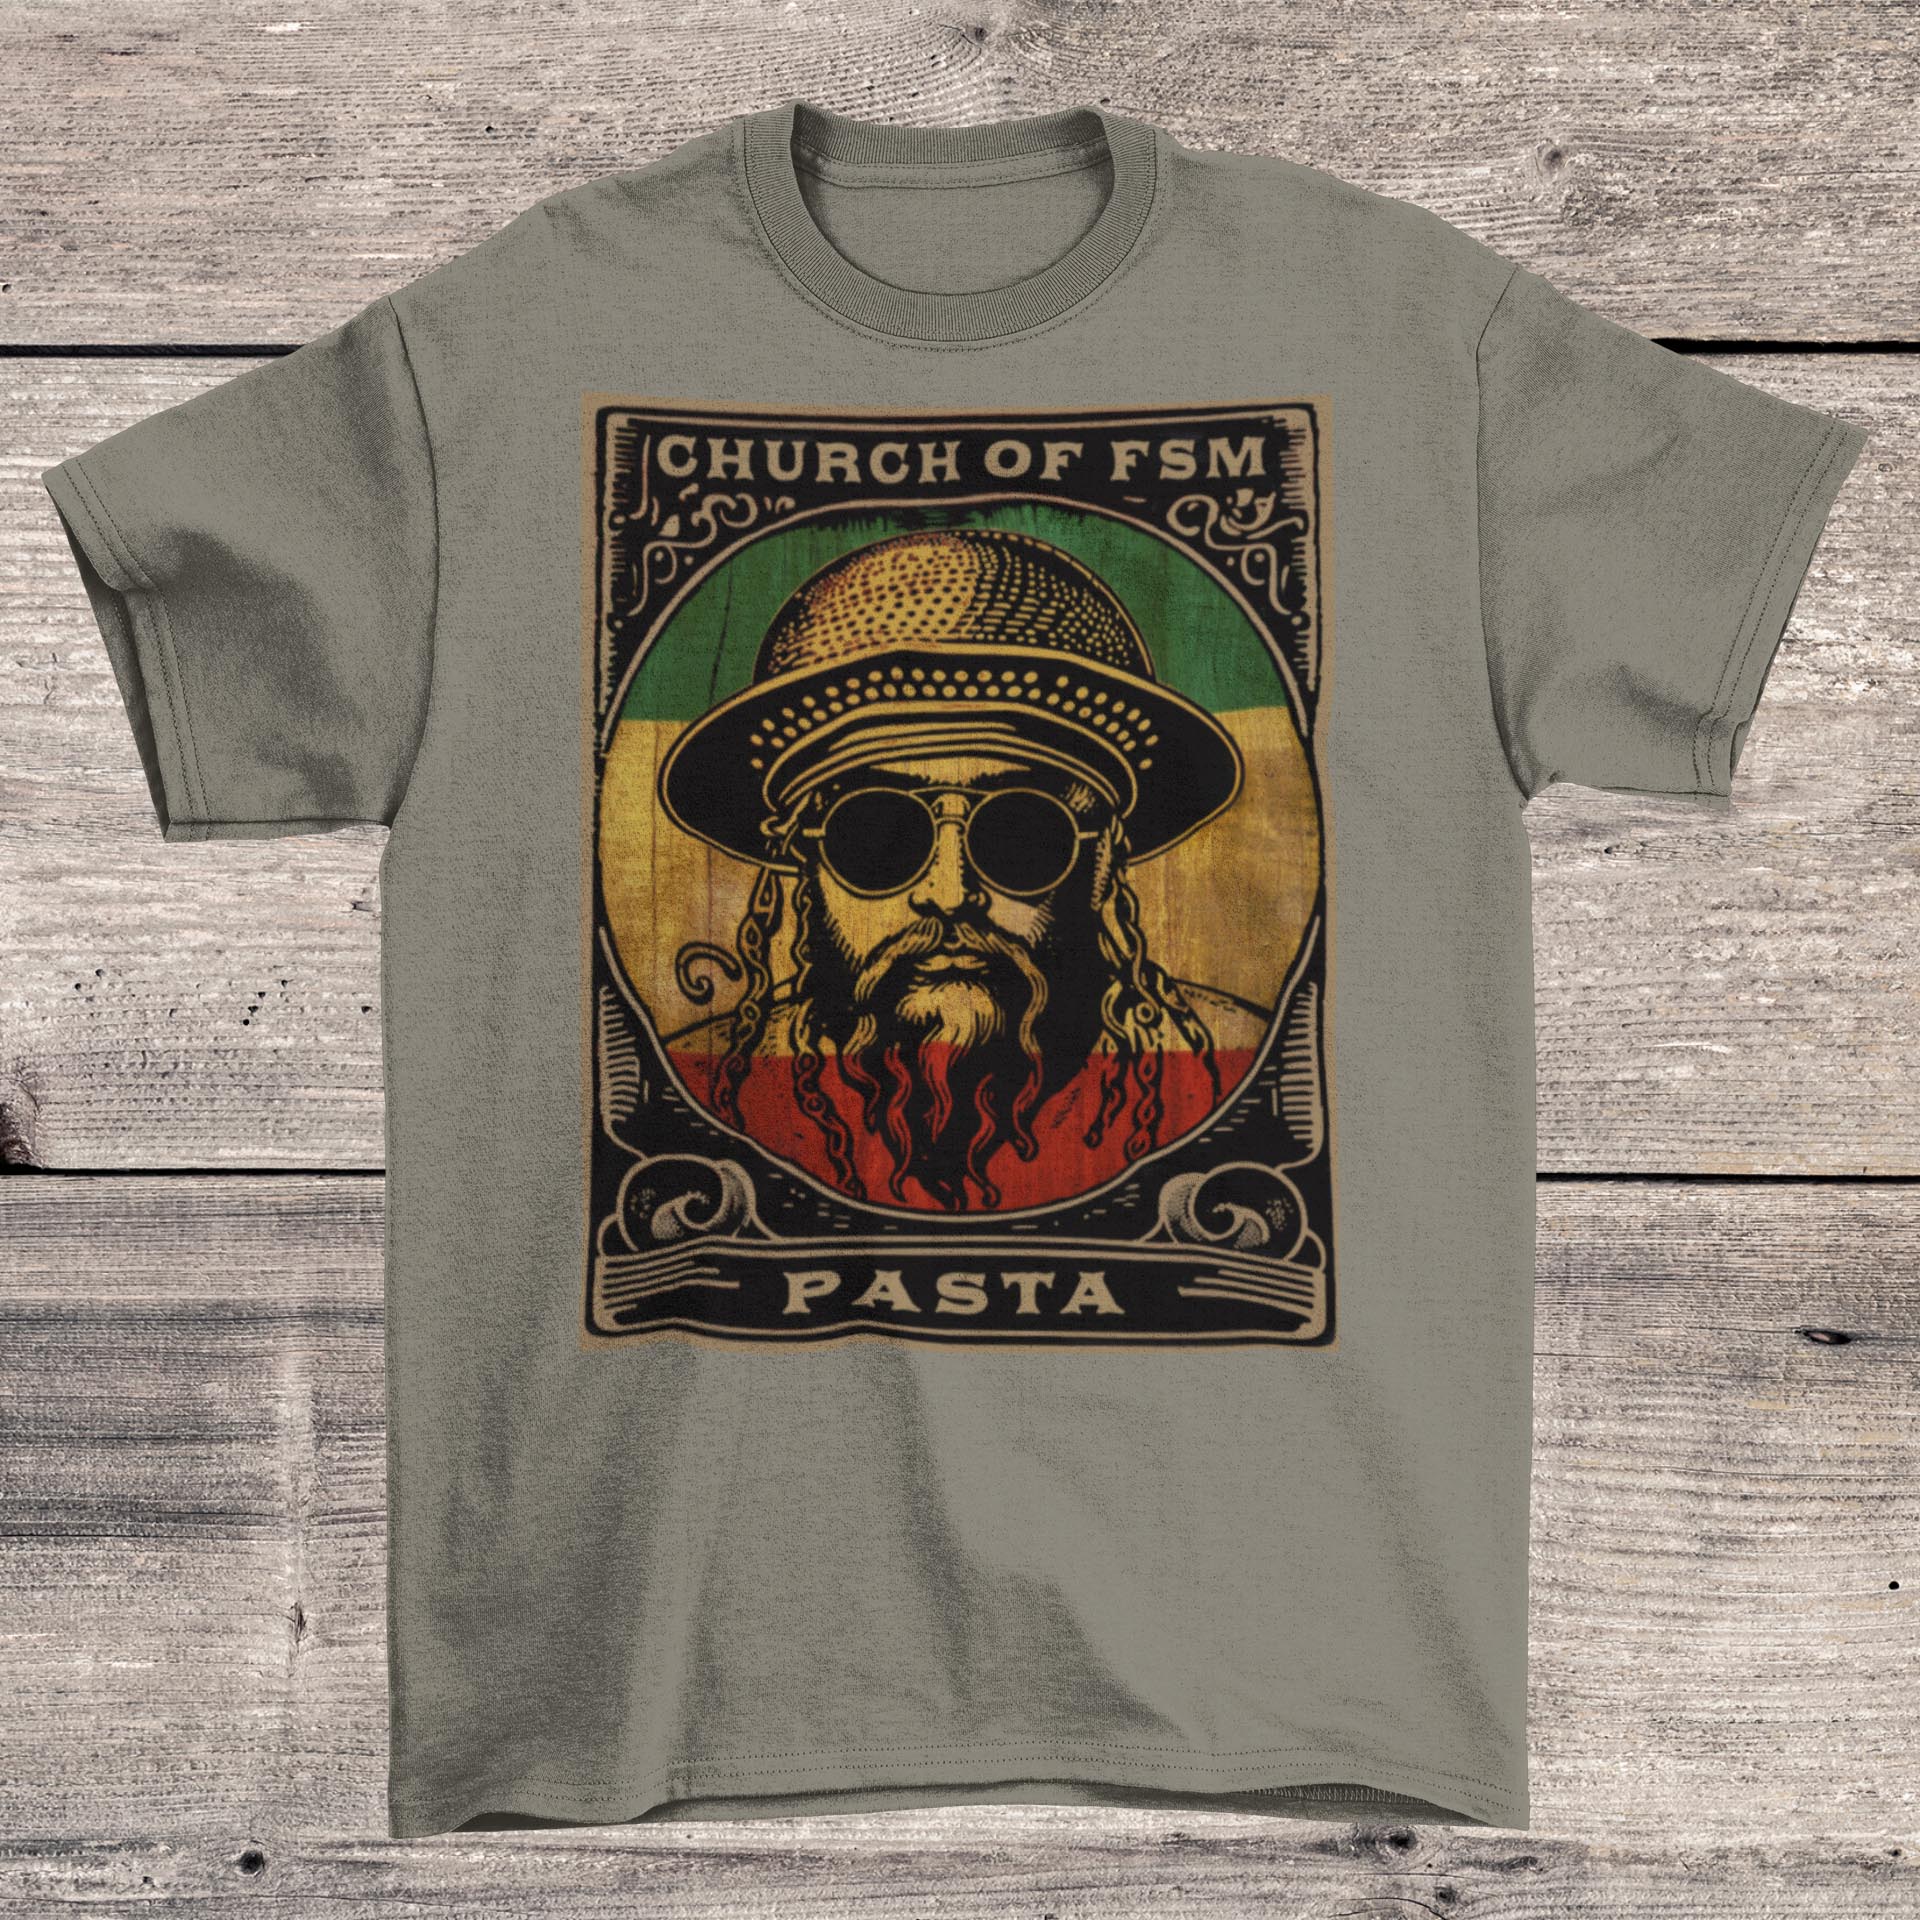 T-Shirts XS / Heather Military Green Pastafarianism & The Flying Spaghetti Monster (FSM) | Reggae and Atheist Inspired Pasta Graphic Art T-Shirt